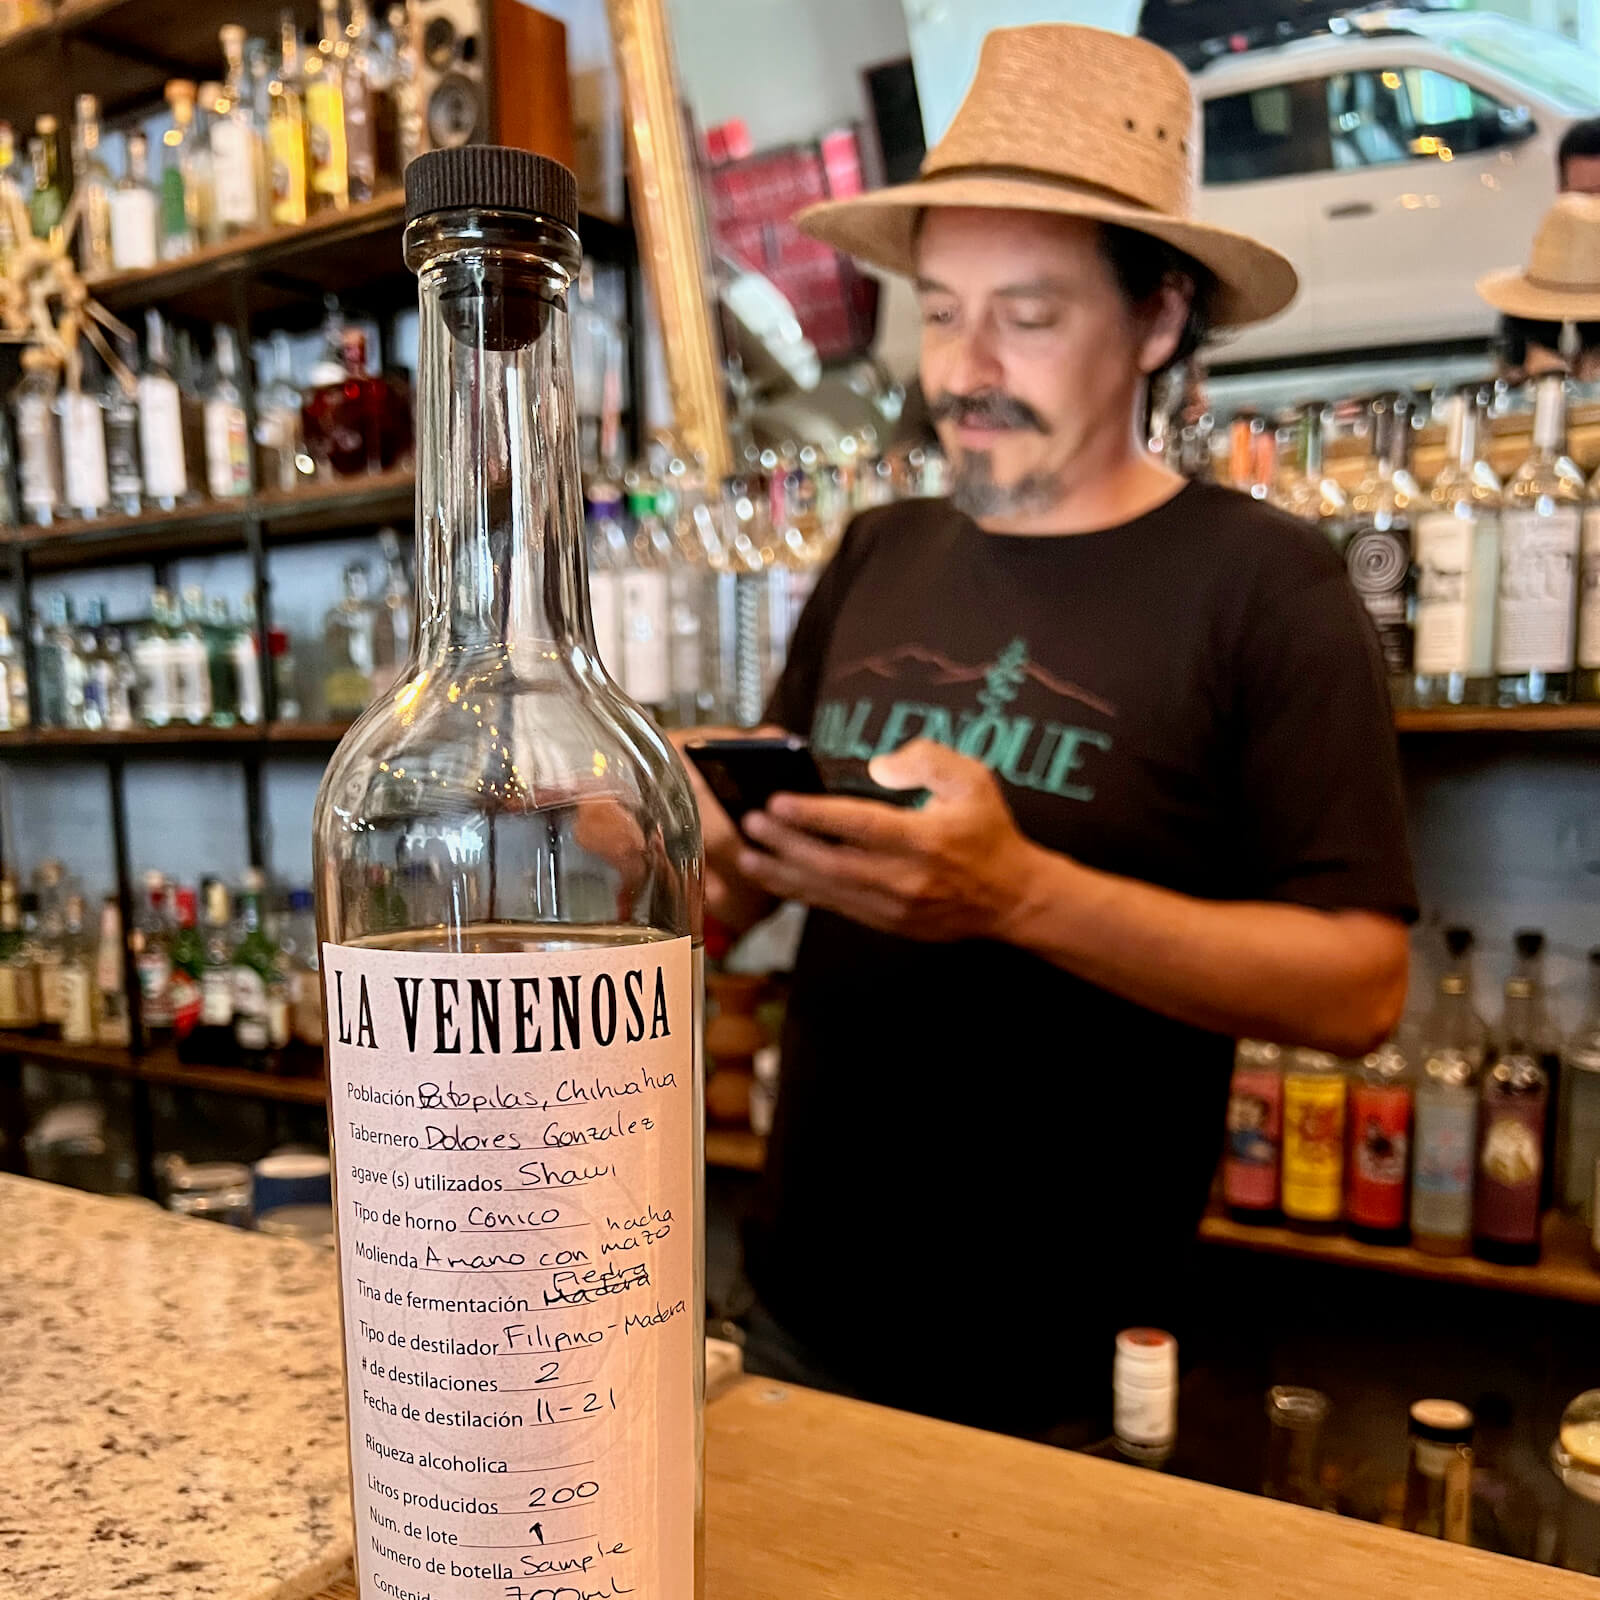 A rare bottle of La Venenosa Raicilla with Esteban Morales out of focus in the background against a large bar